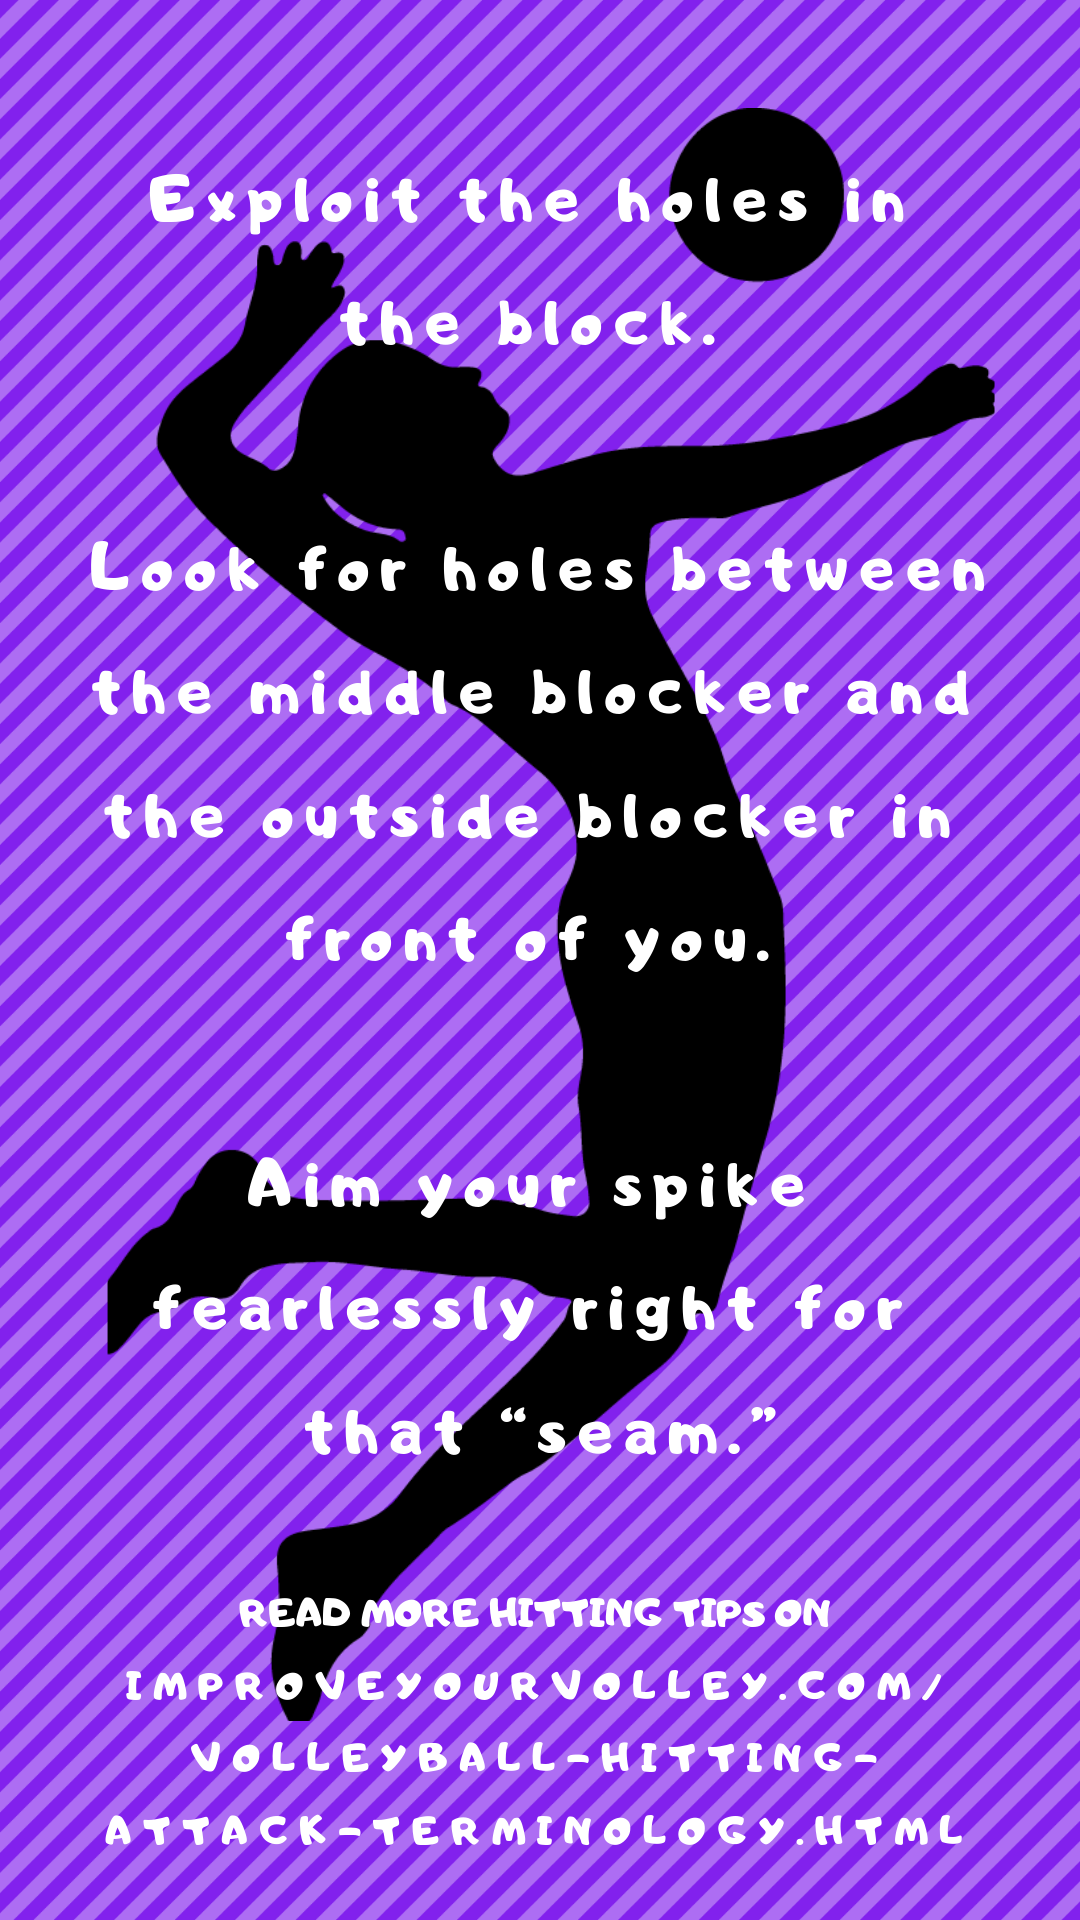 Volleyball Spike Tips: Exploit the holes in the block.  Look for holes between the middle blocker and the outside blocker in front of you.  Aim your spike fearlessly right for that “seam.”